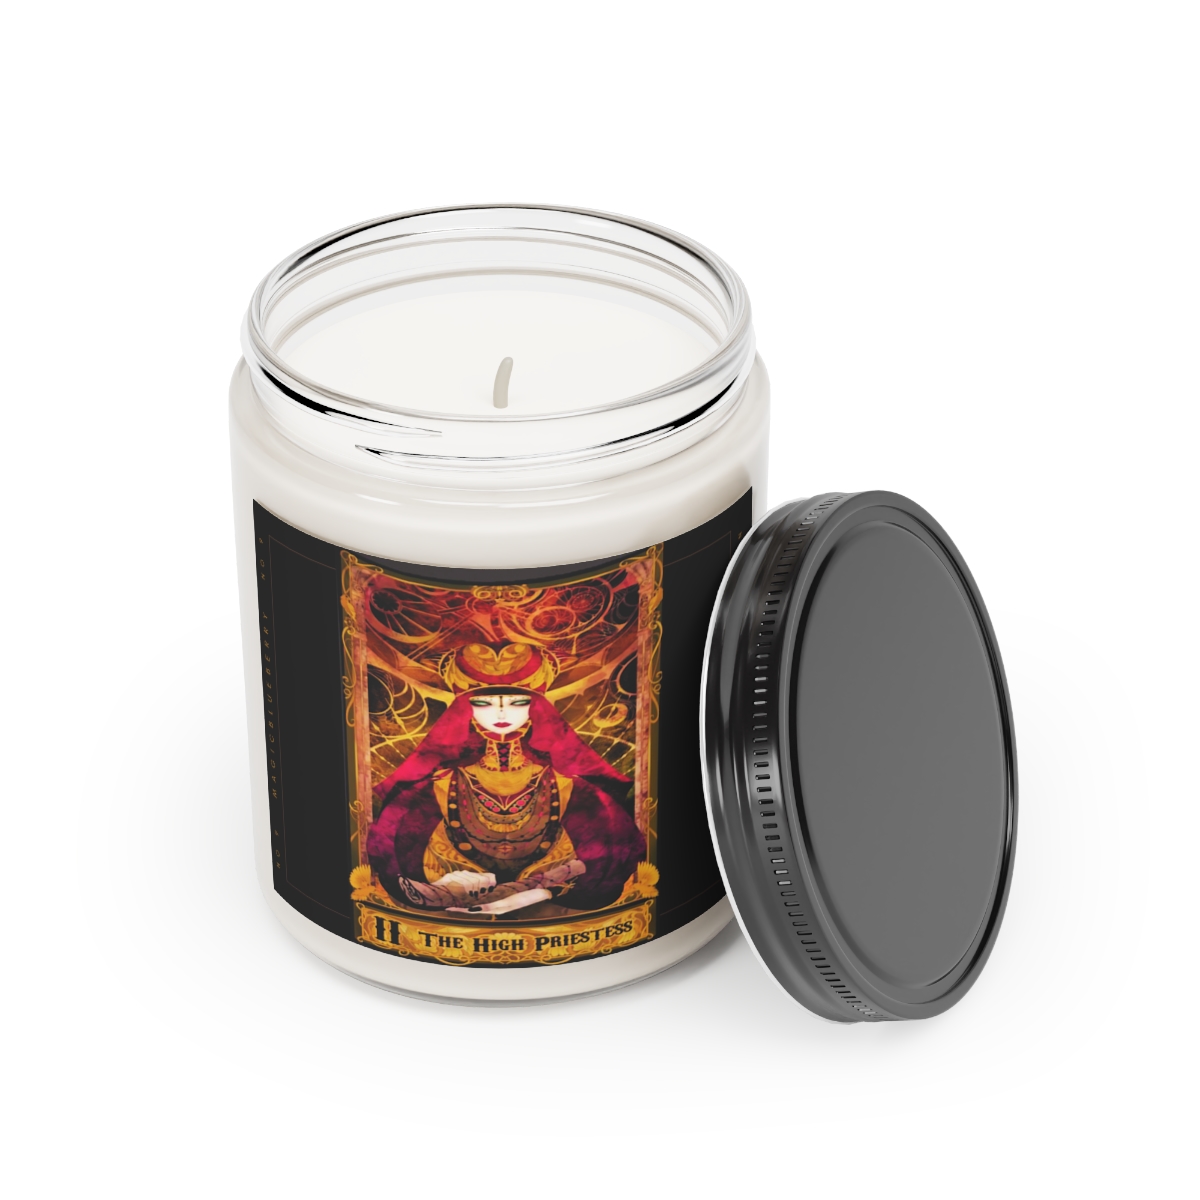 The High Priestess - Scented Vegan Soy Wax Candles, Clear Jar Candle, Spell Candles, Tarot Candle, Vegan Candle, Cotton Wick Candle product thumbnail image